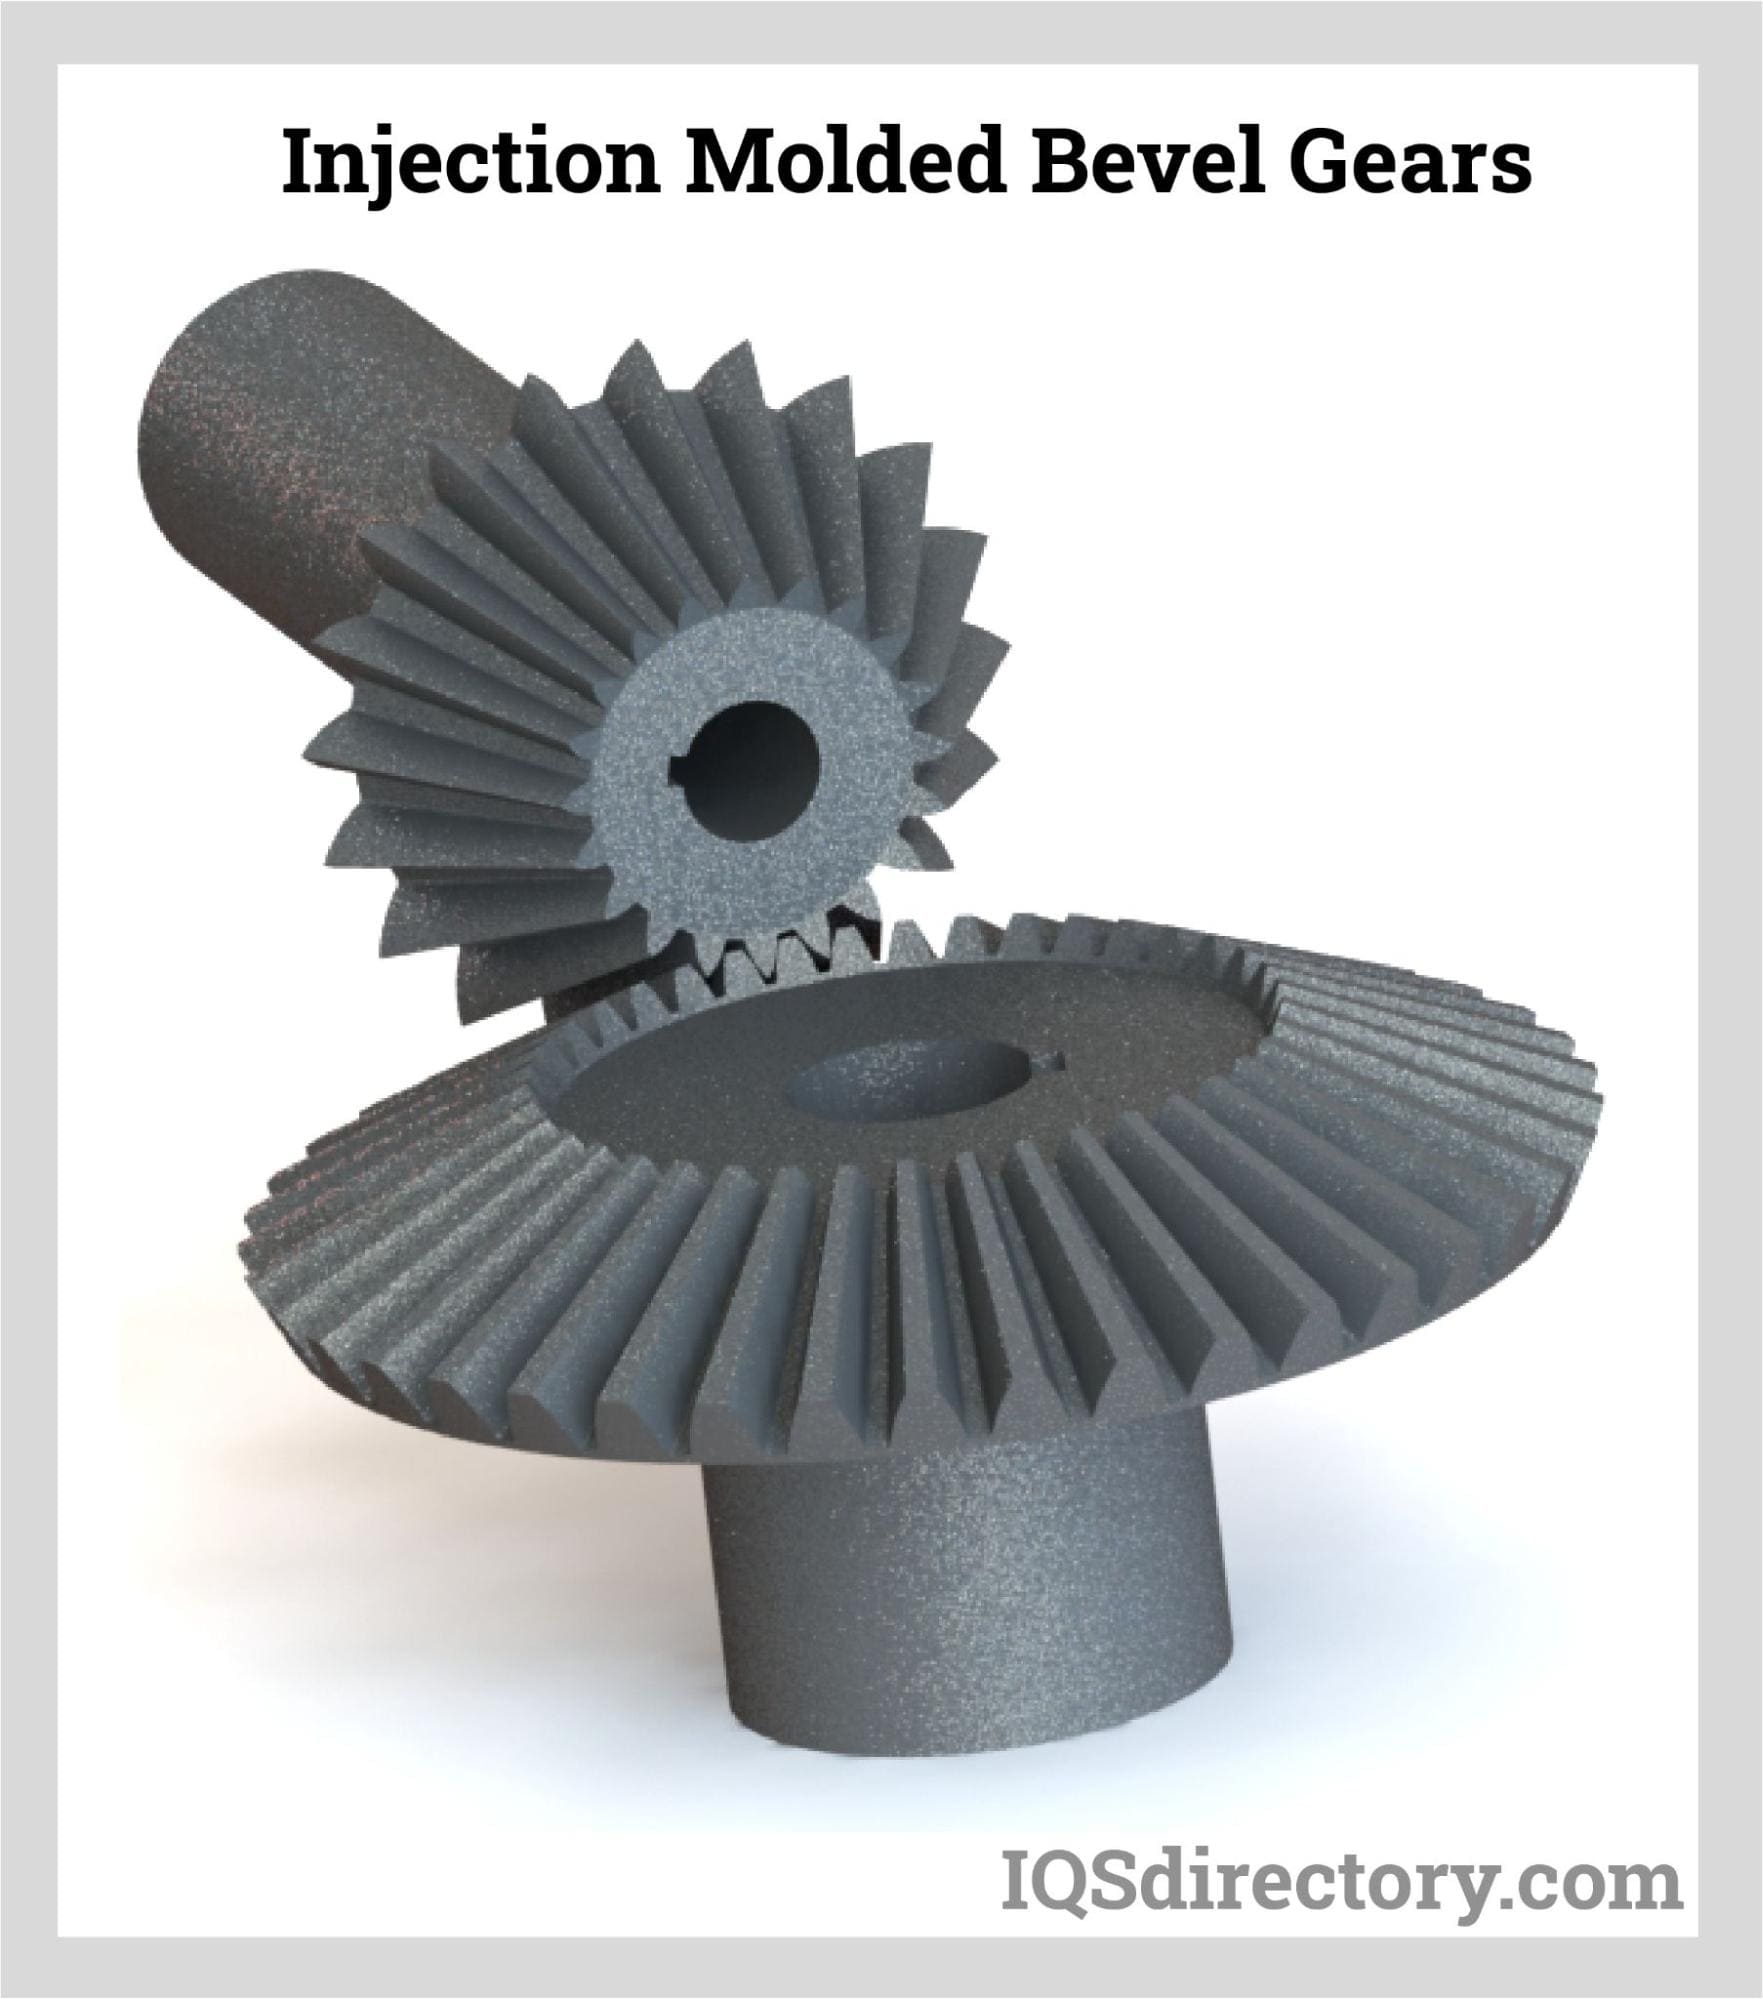 Injection Molded Bevel Gears